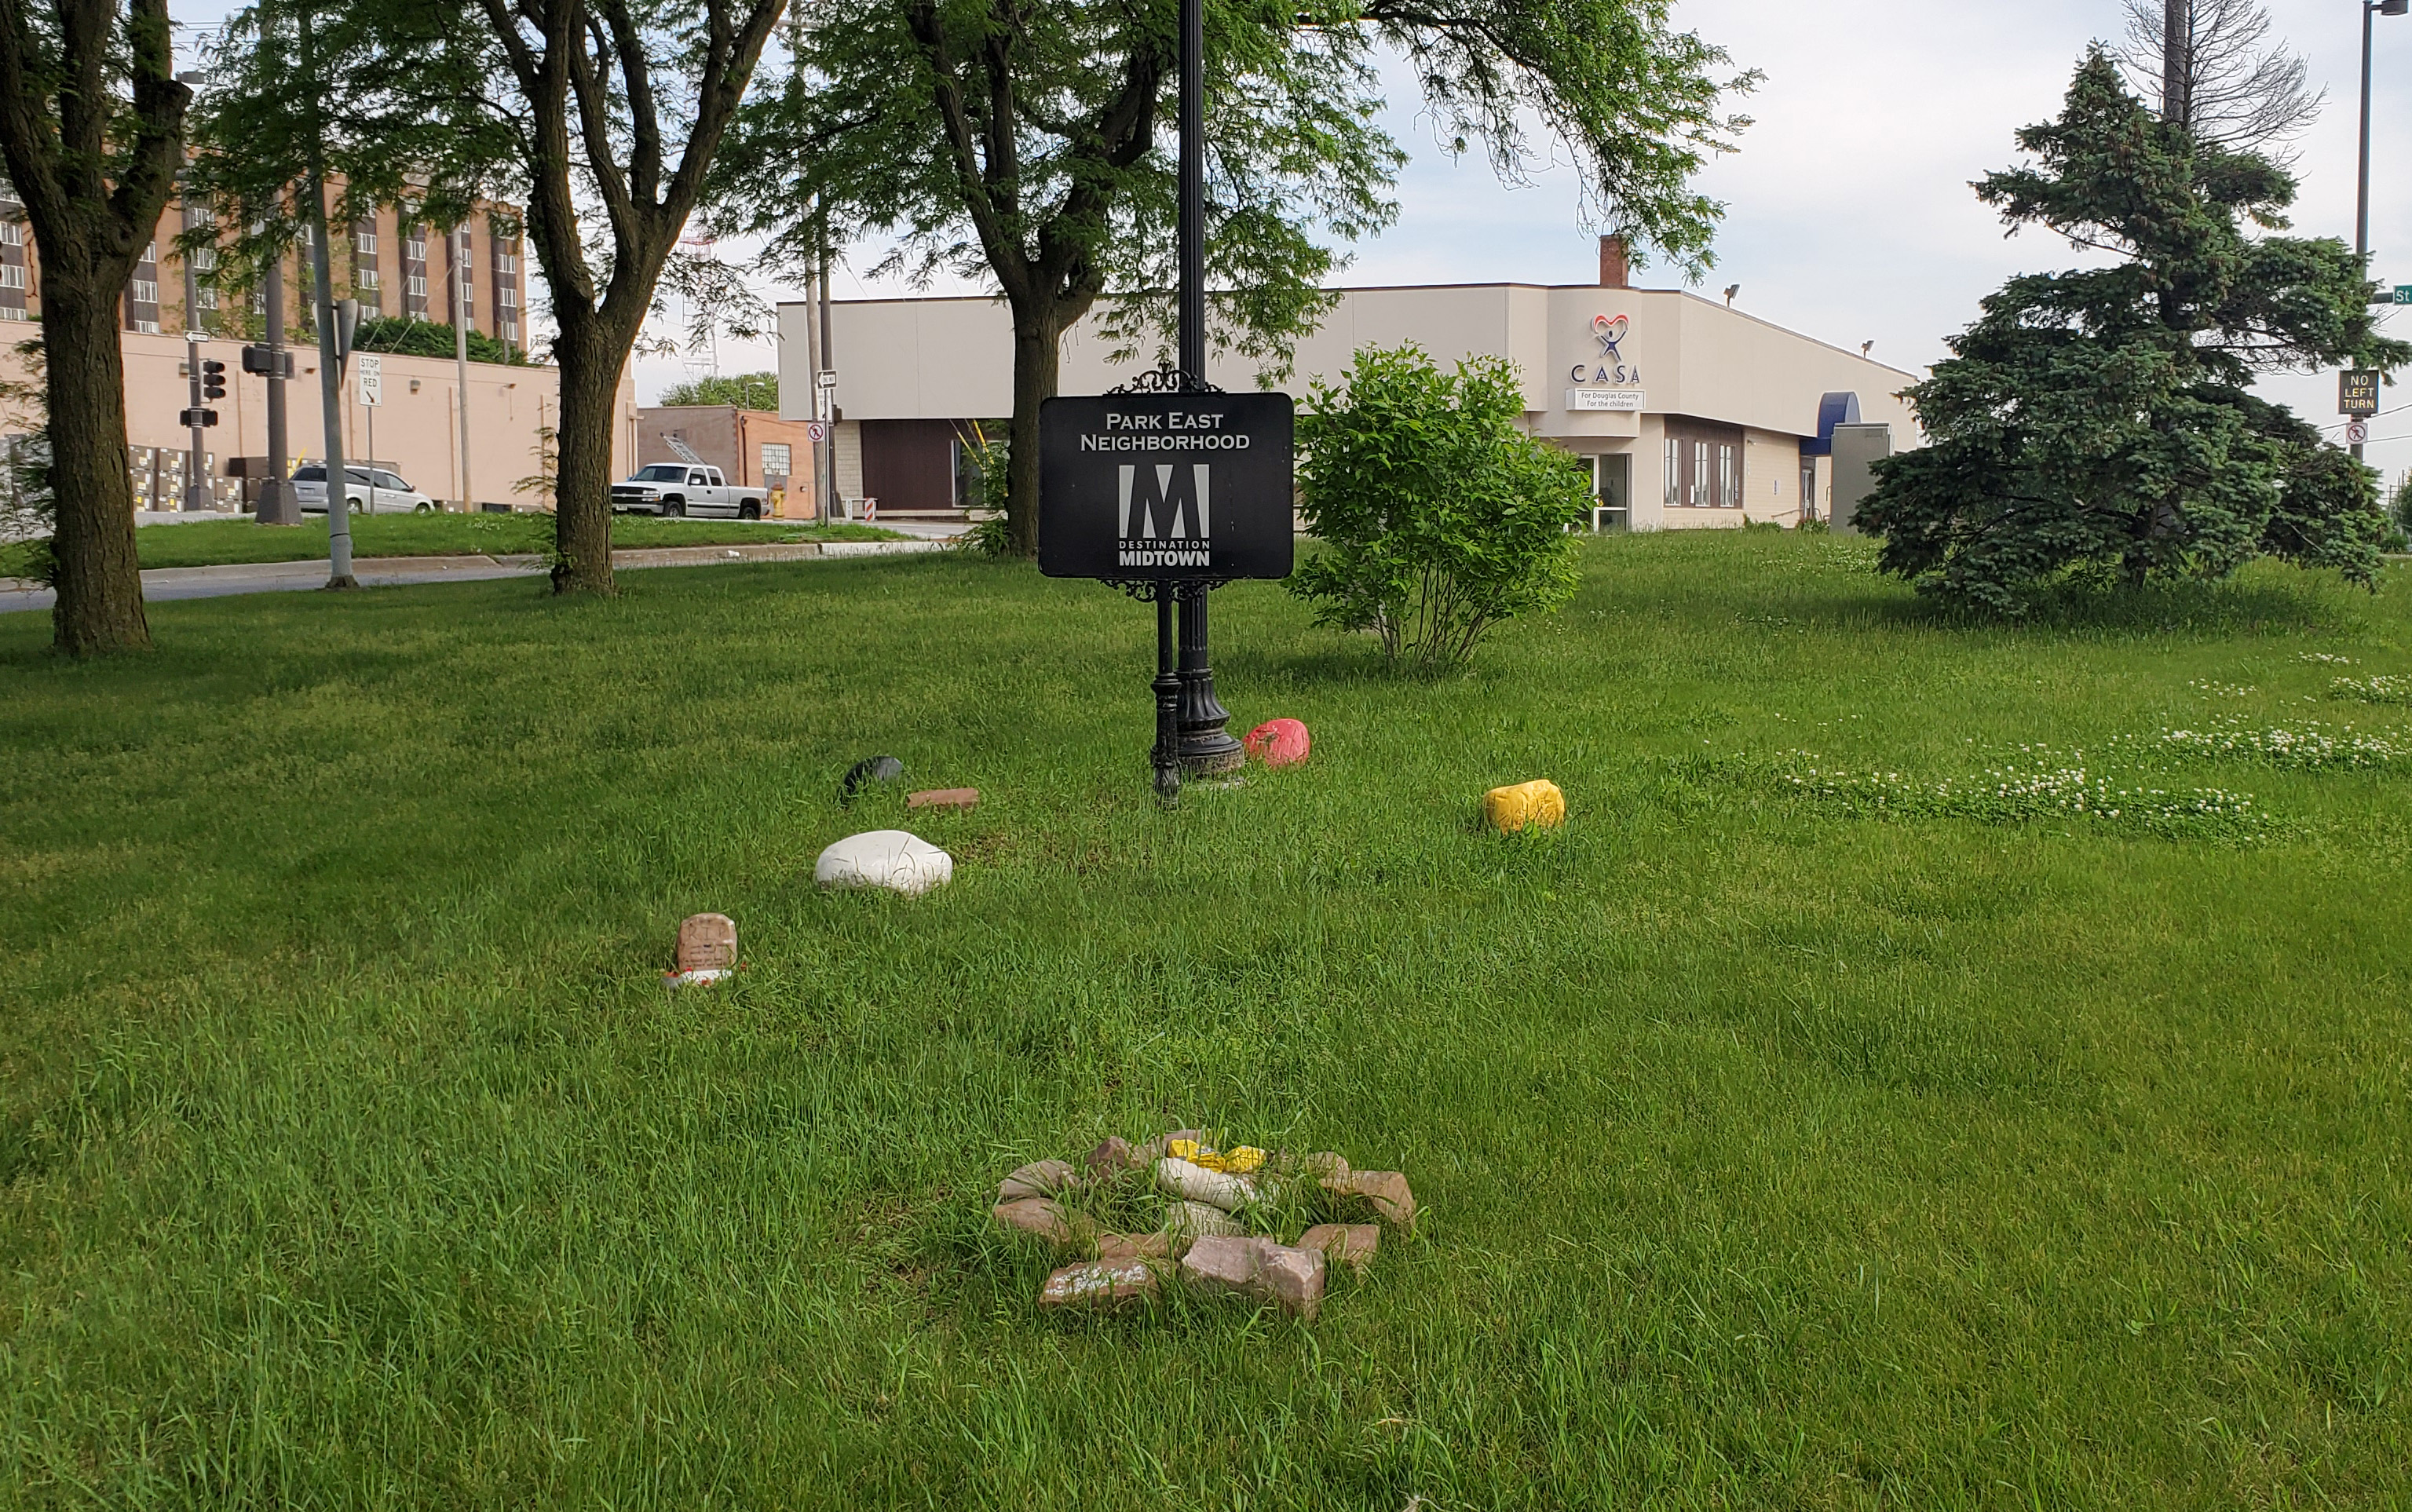 Native American Stone Circle and Park East Neighborhood sign.